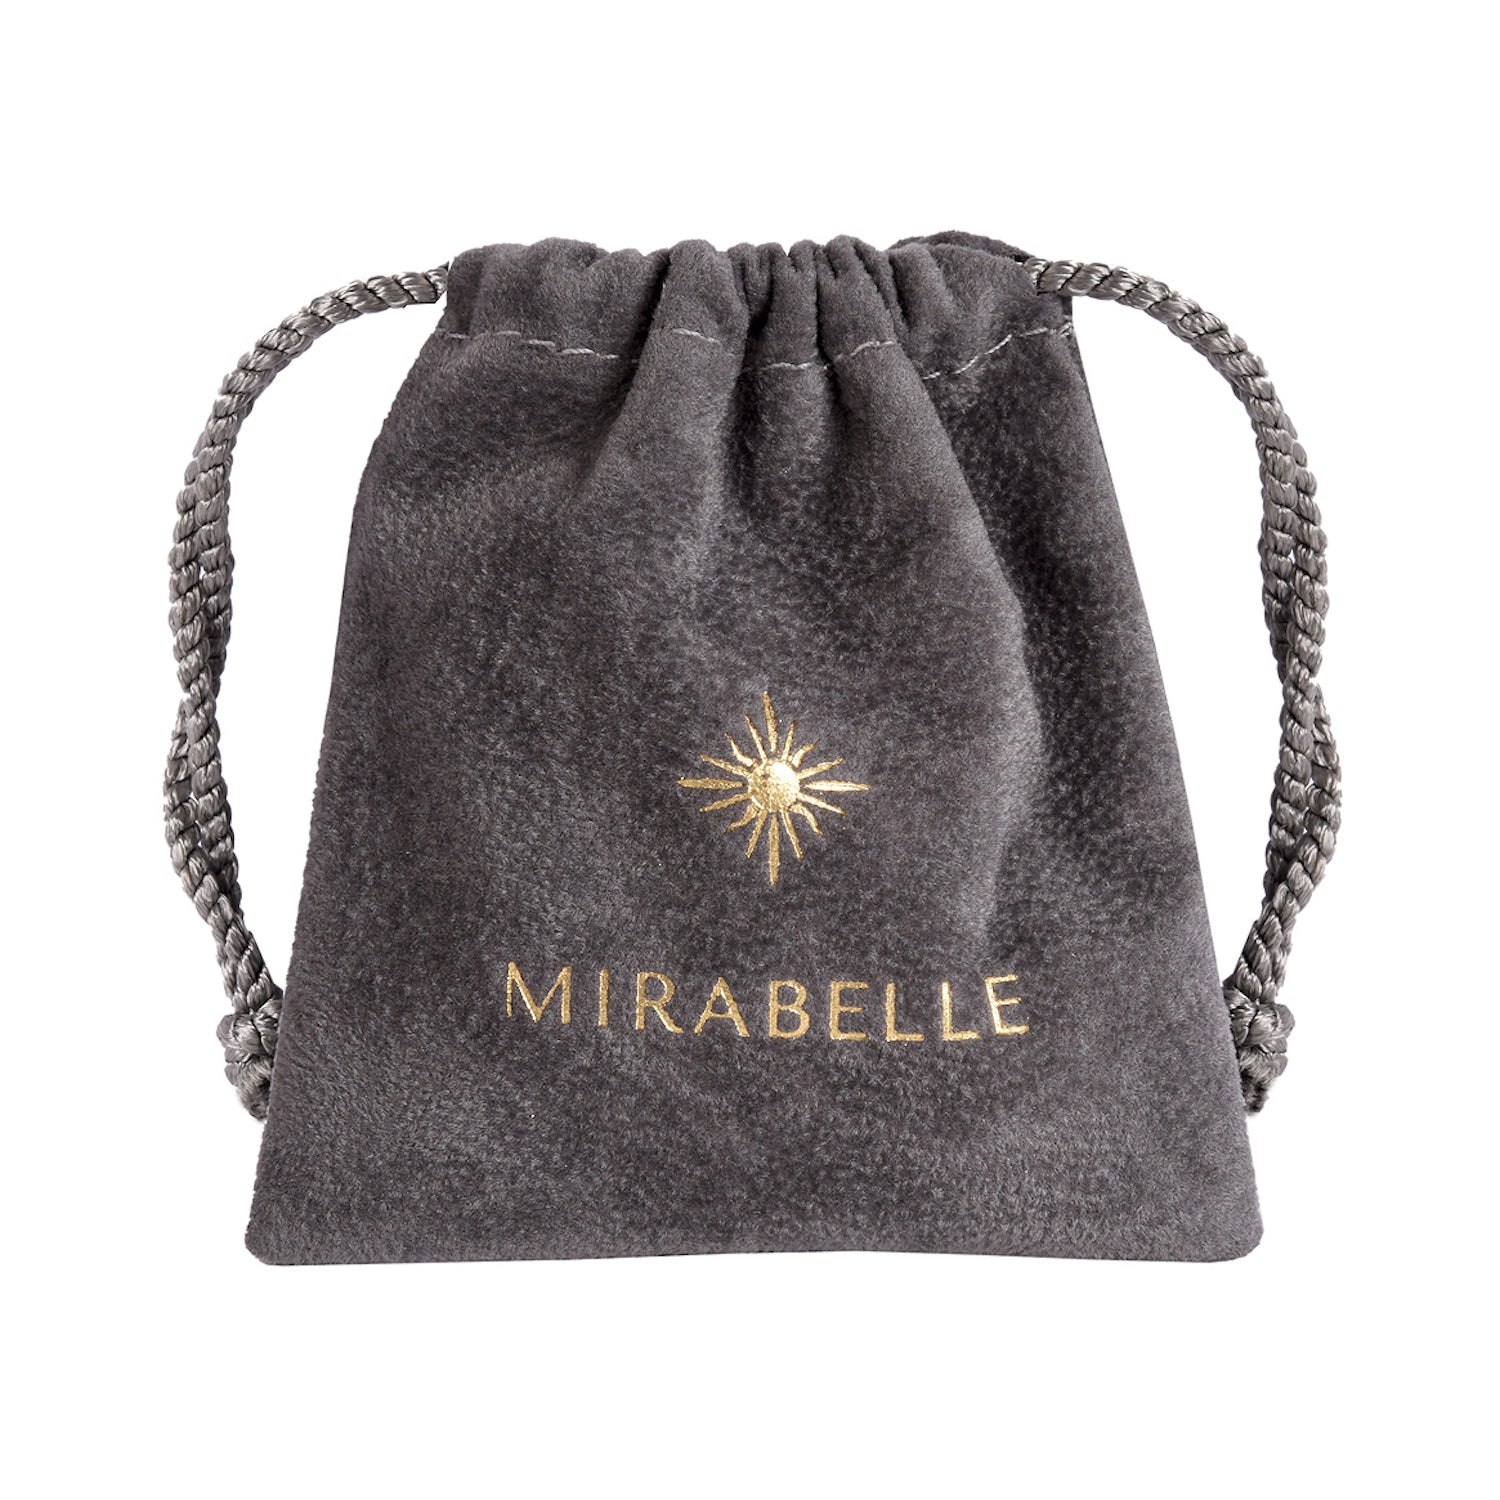 Mary Medal - Mirabelle Jewellery